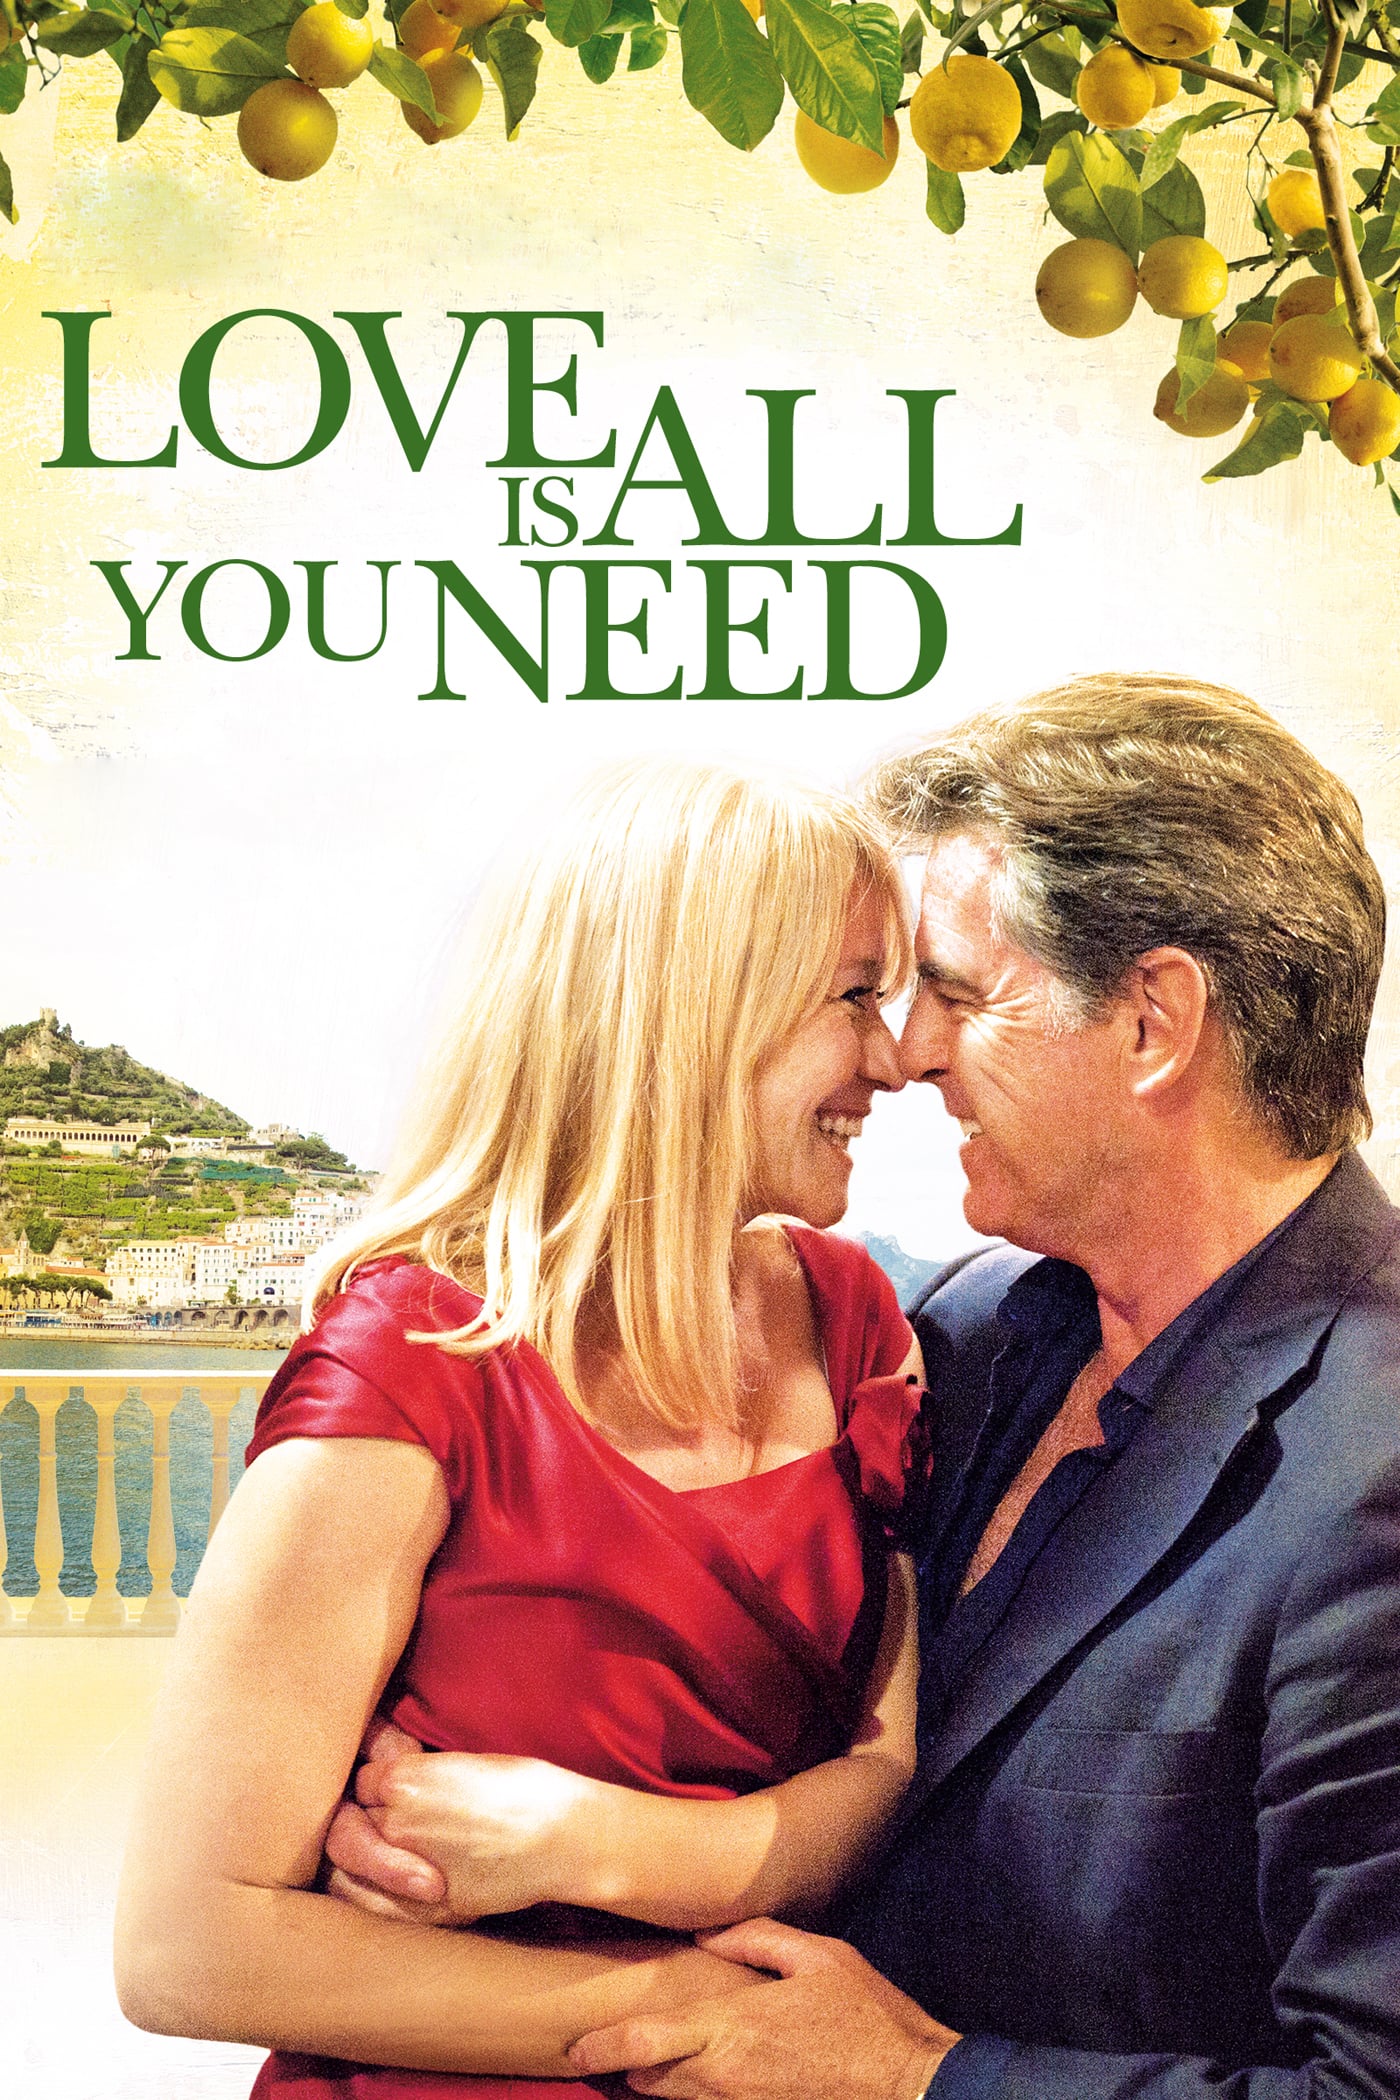 Plakat von "Love is all you need"